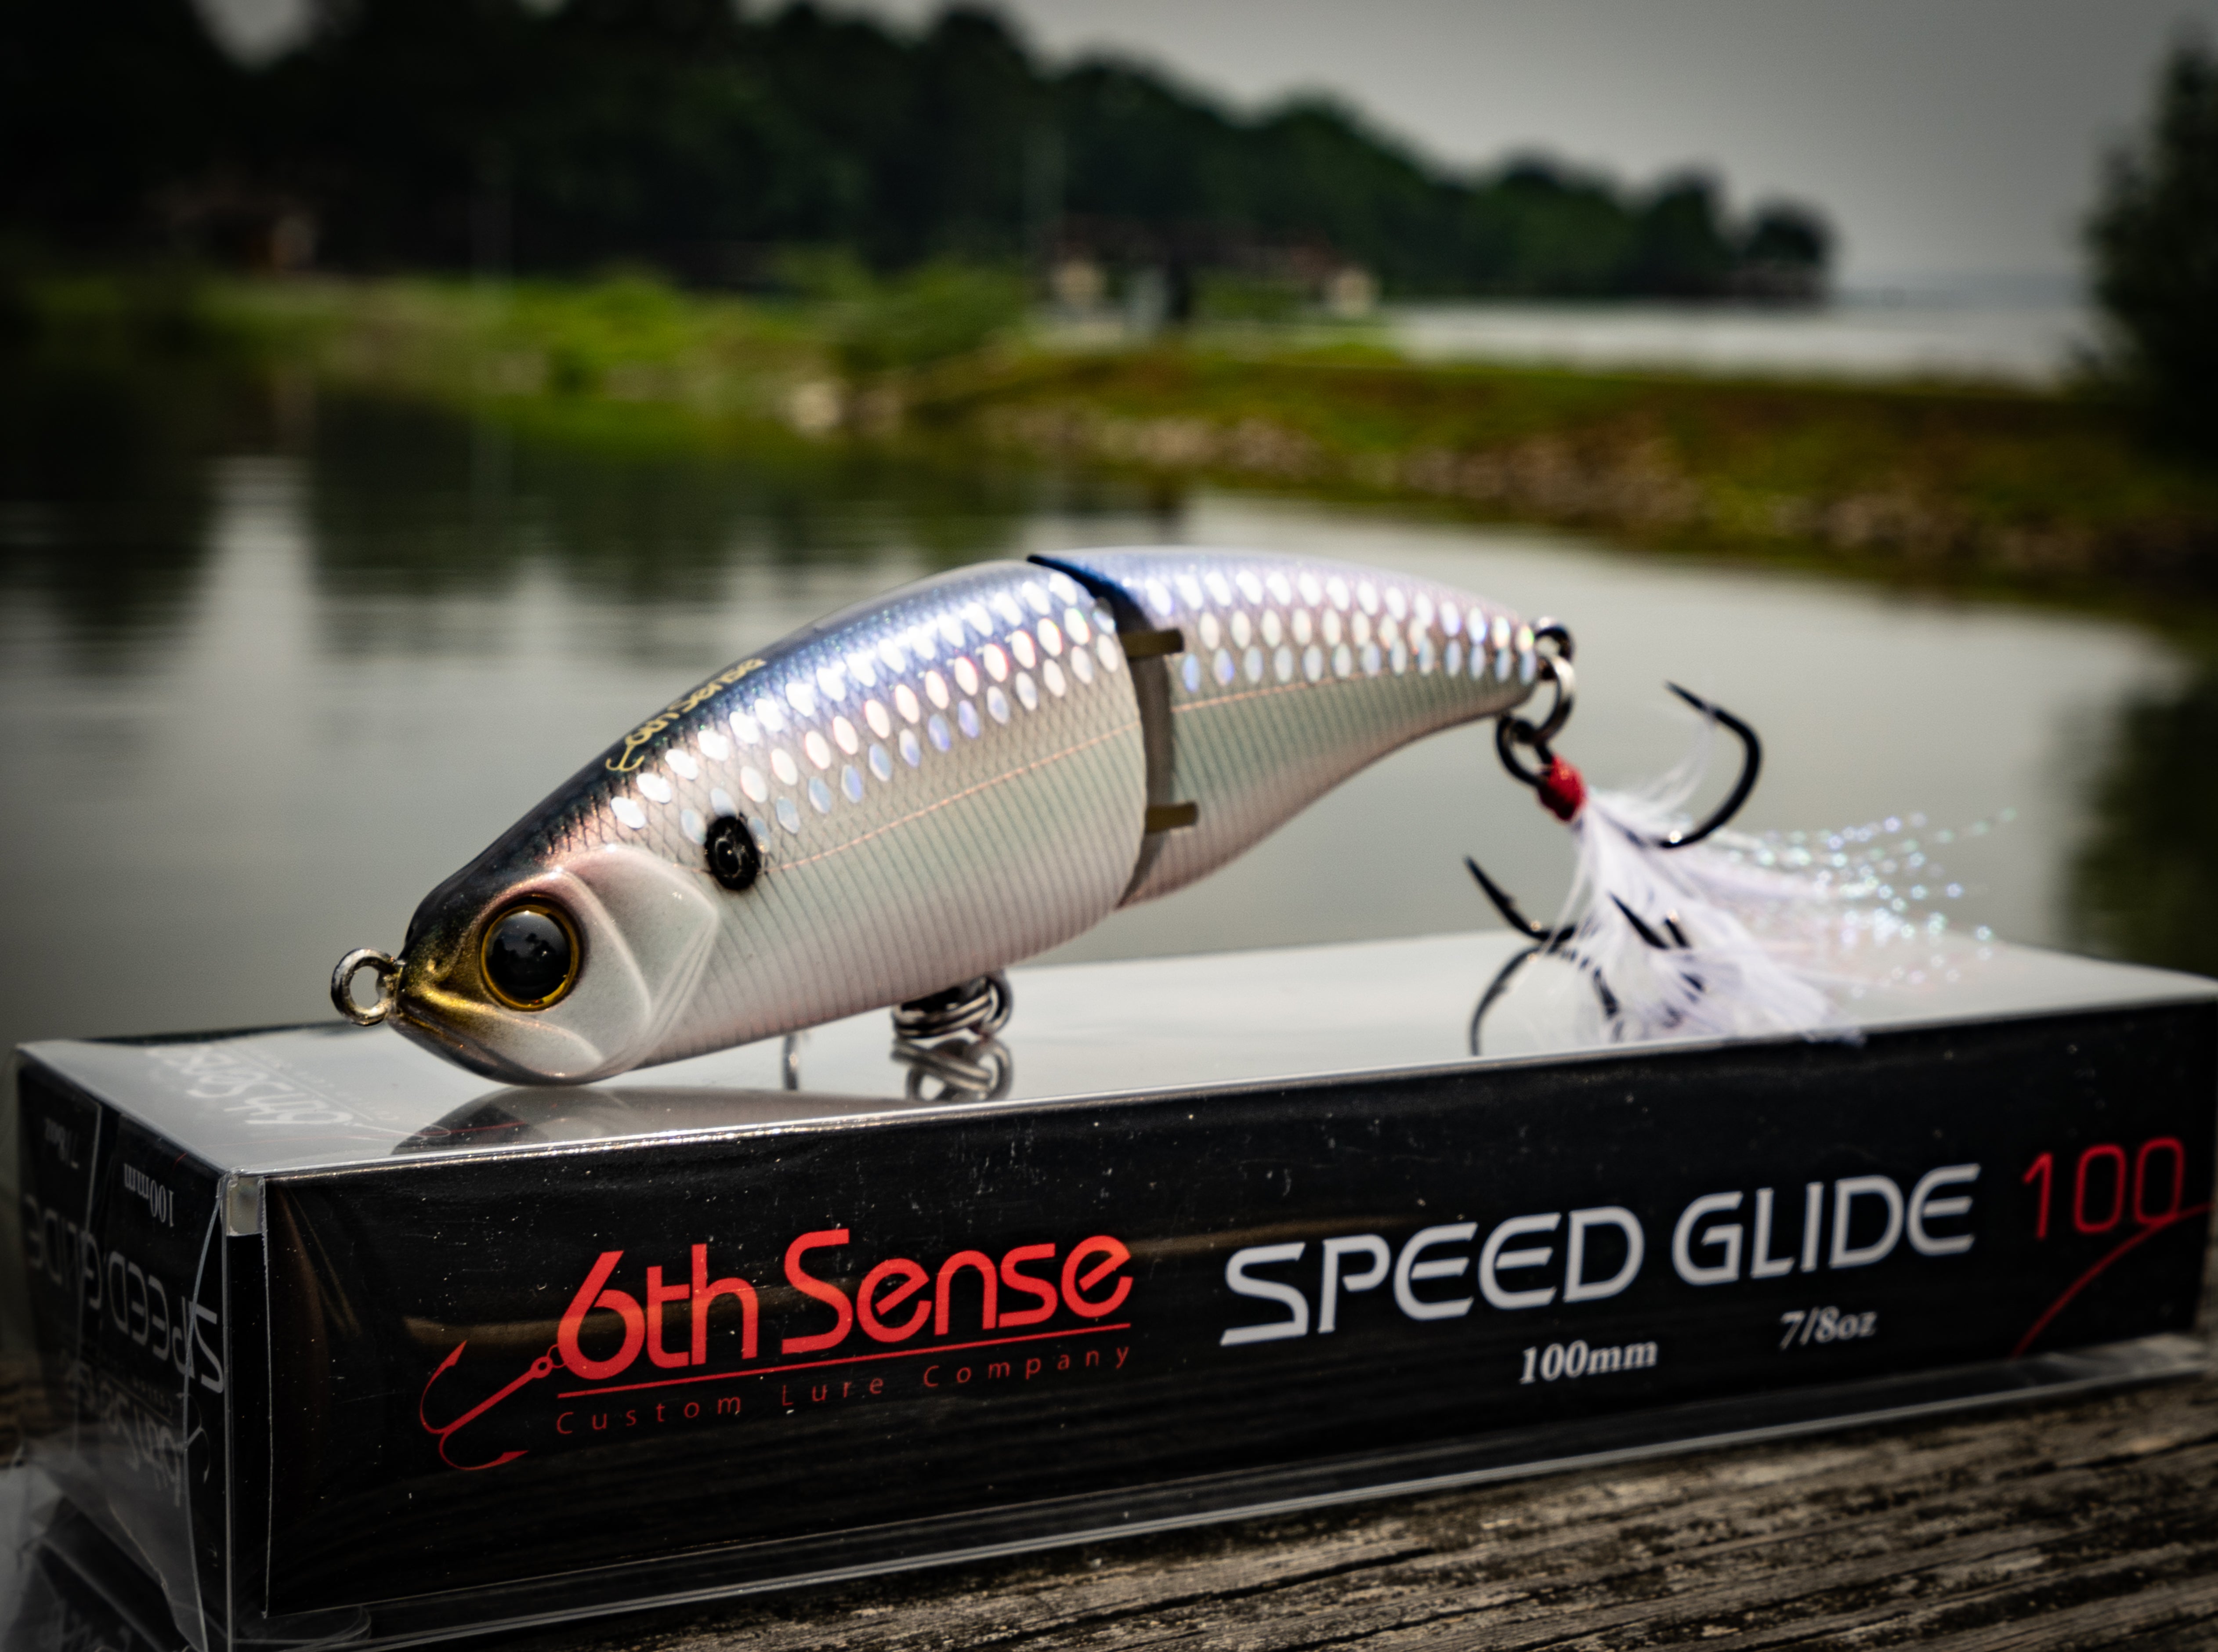 Speed Glide 100 - Shad Scales